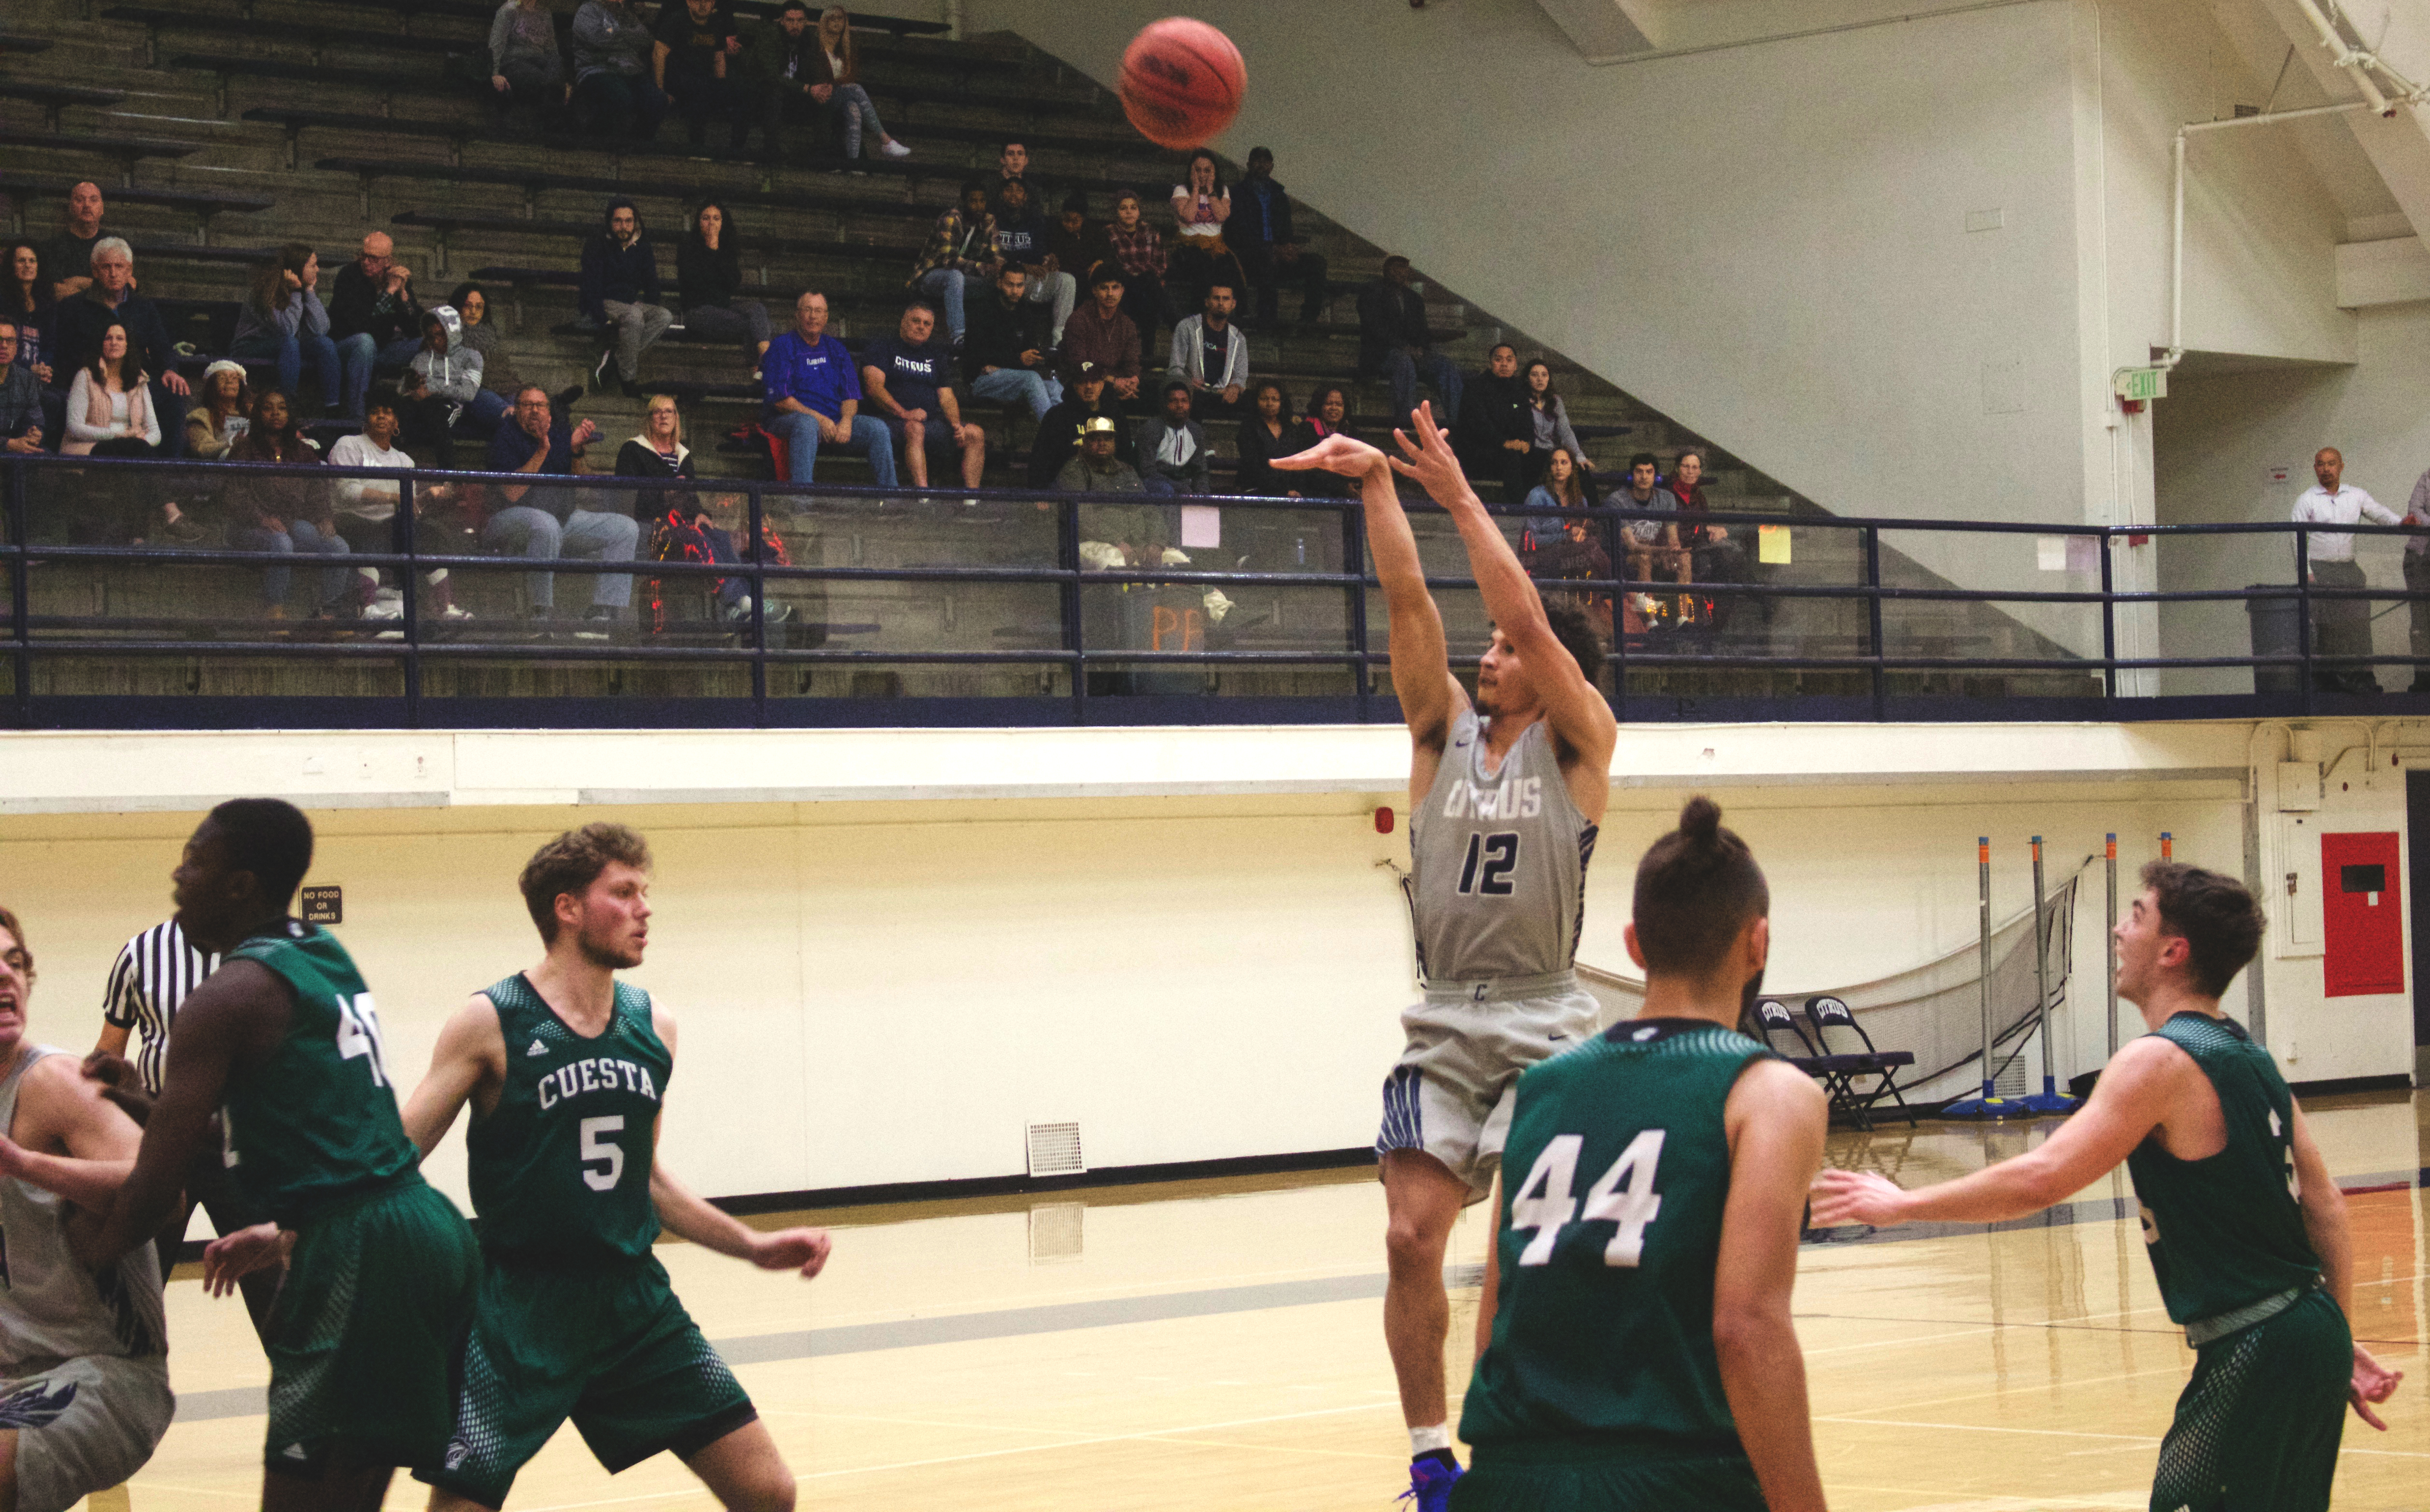 Men’s basketball win playoff round over Cuesta Cougars